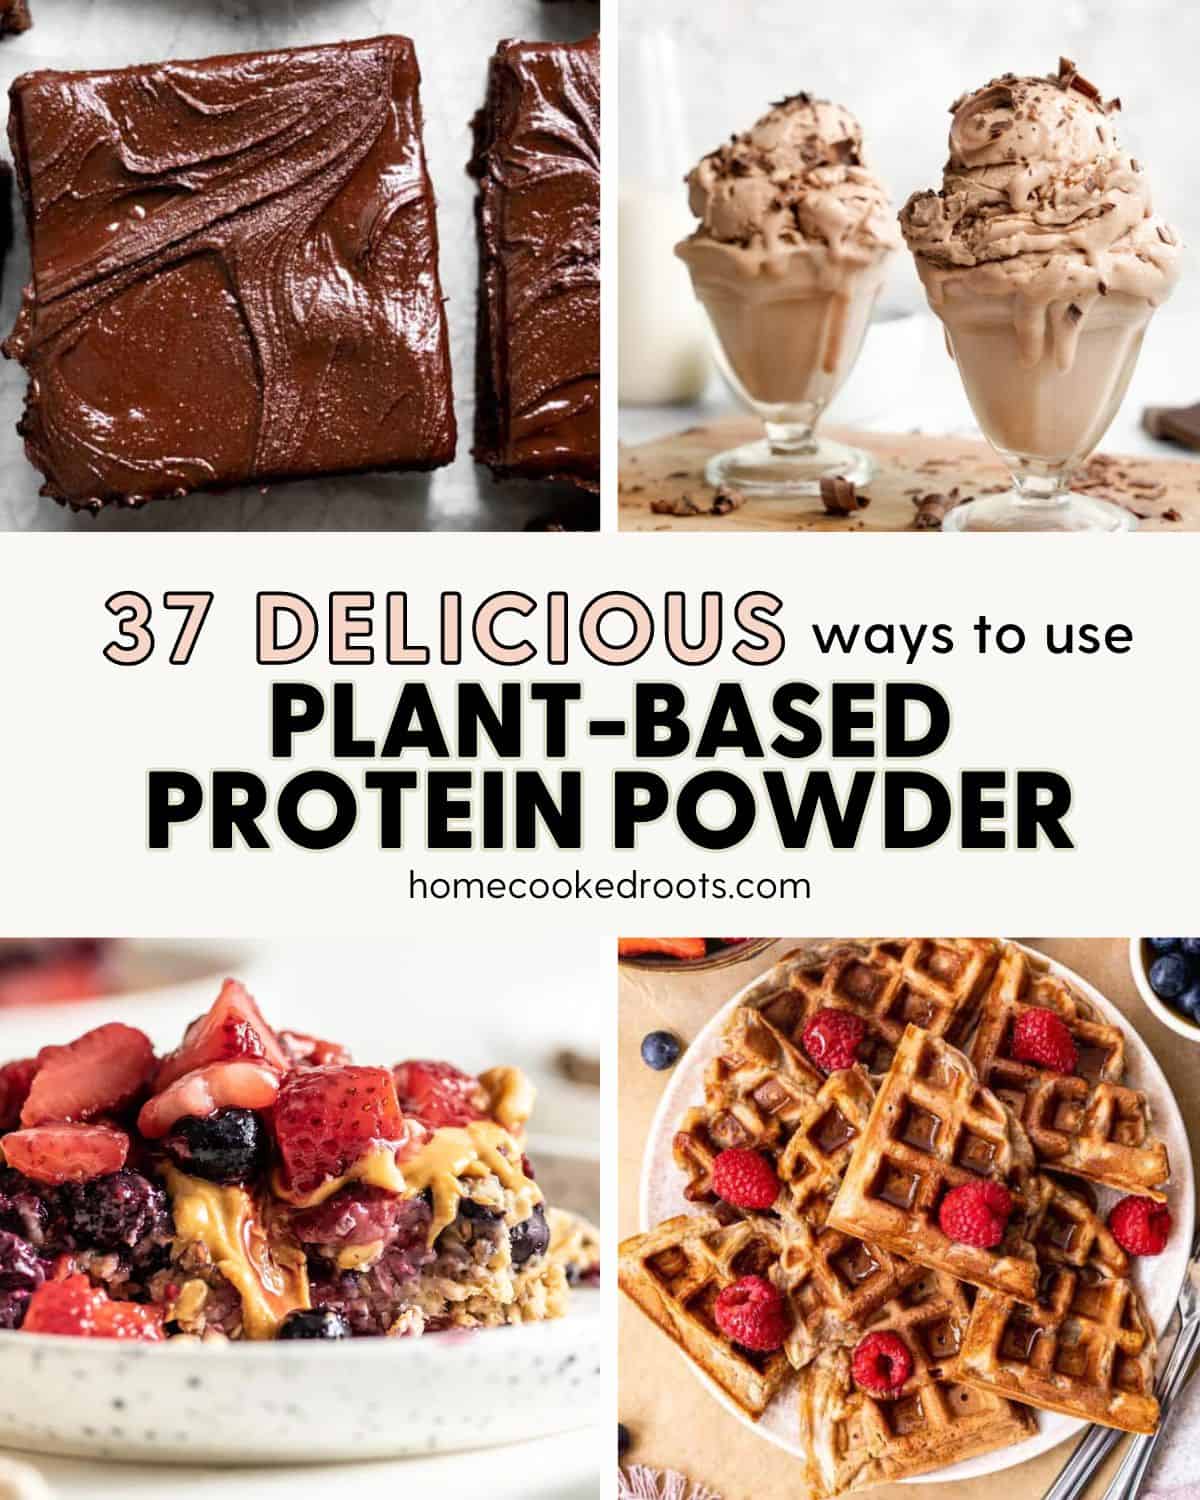 Collage of 4 images of recipes using plant-based protein powder. 